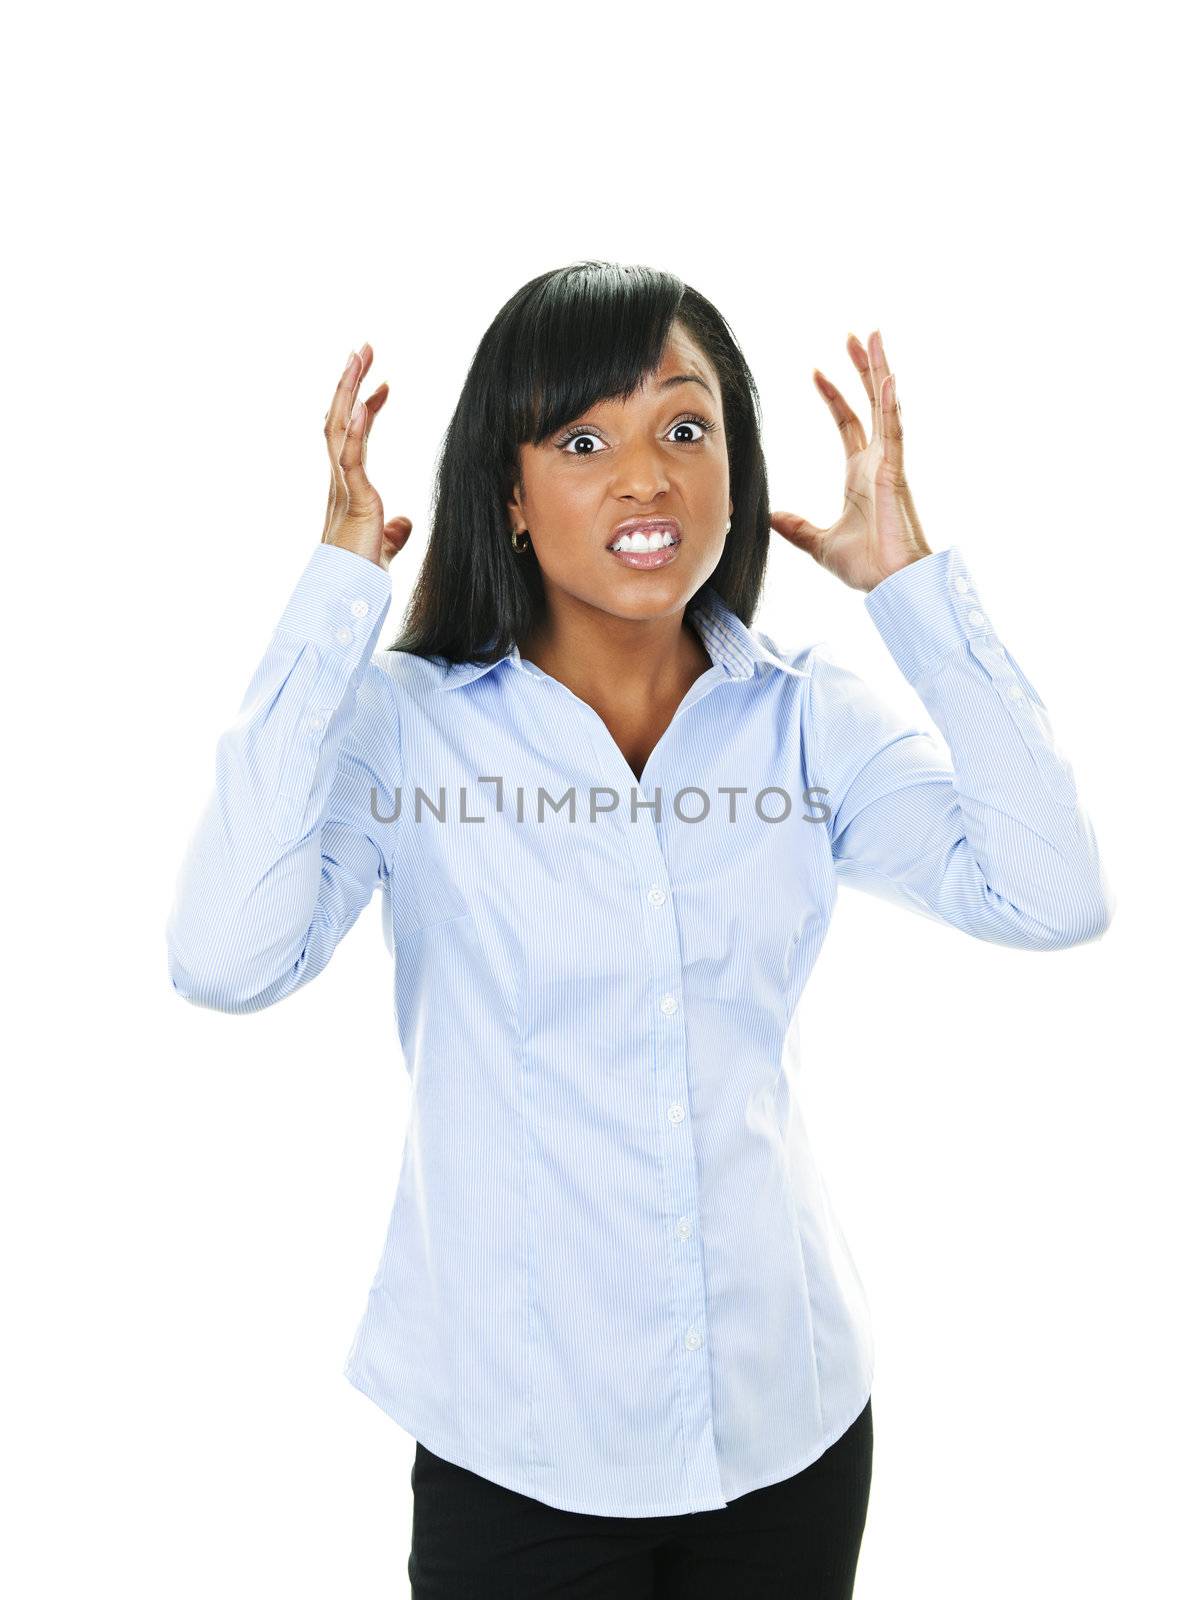 Frustrated black woman with arms raised isolated on white background